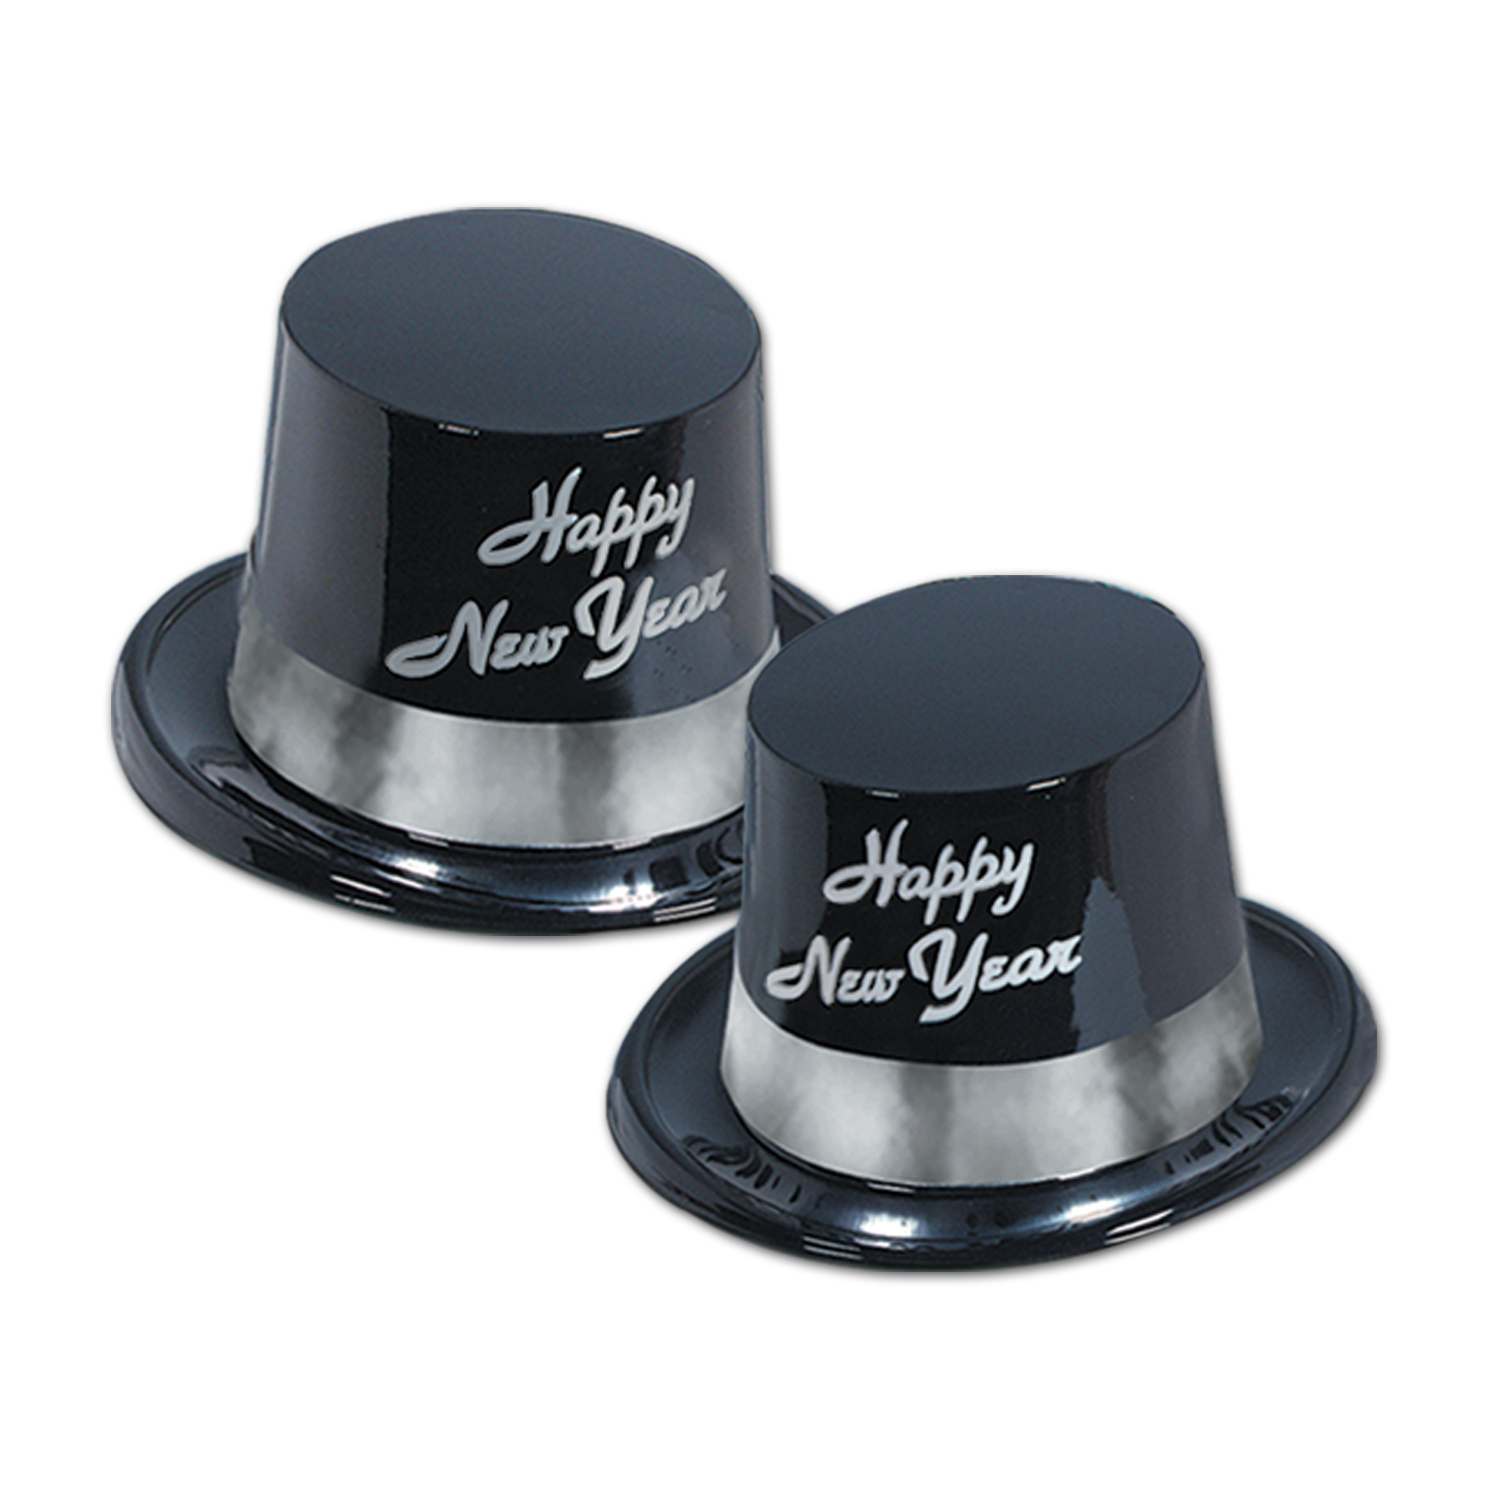 Black topper with silver band and the words "Happy New Year" printed in silver on the front.